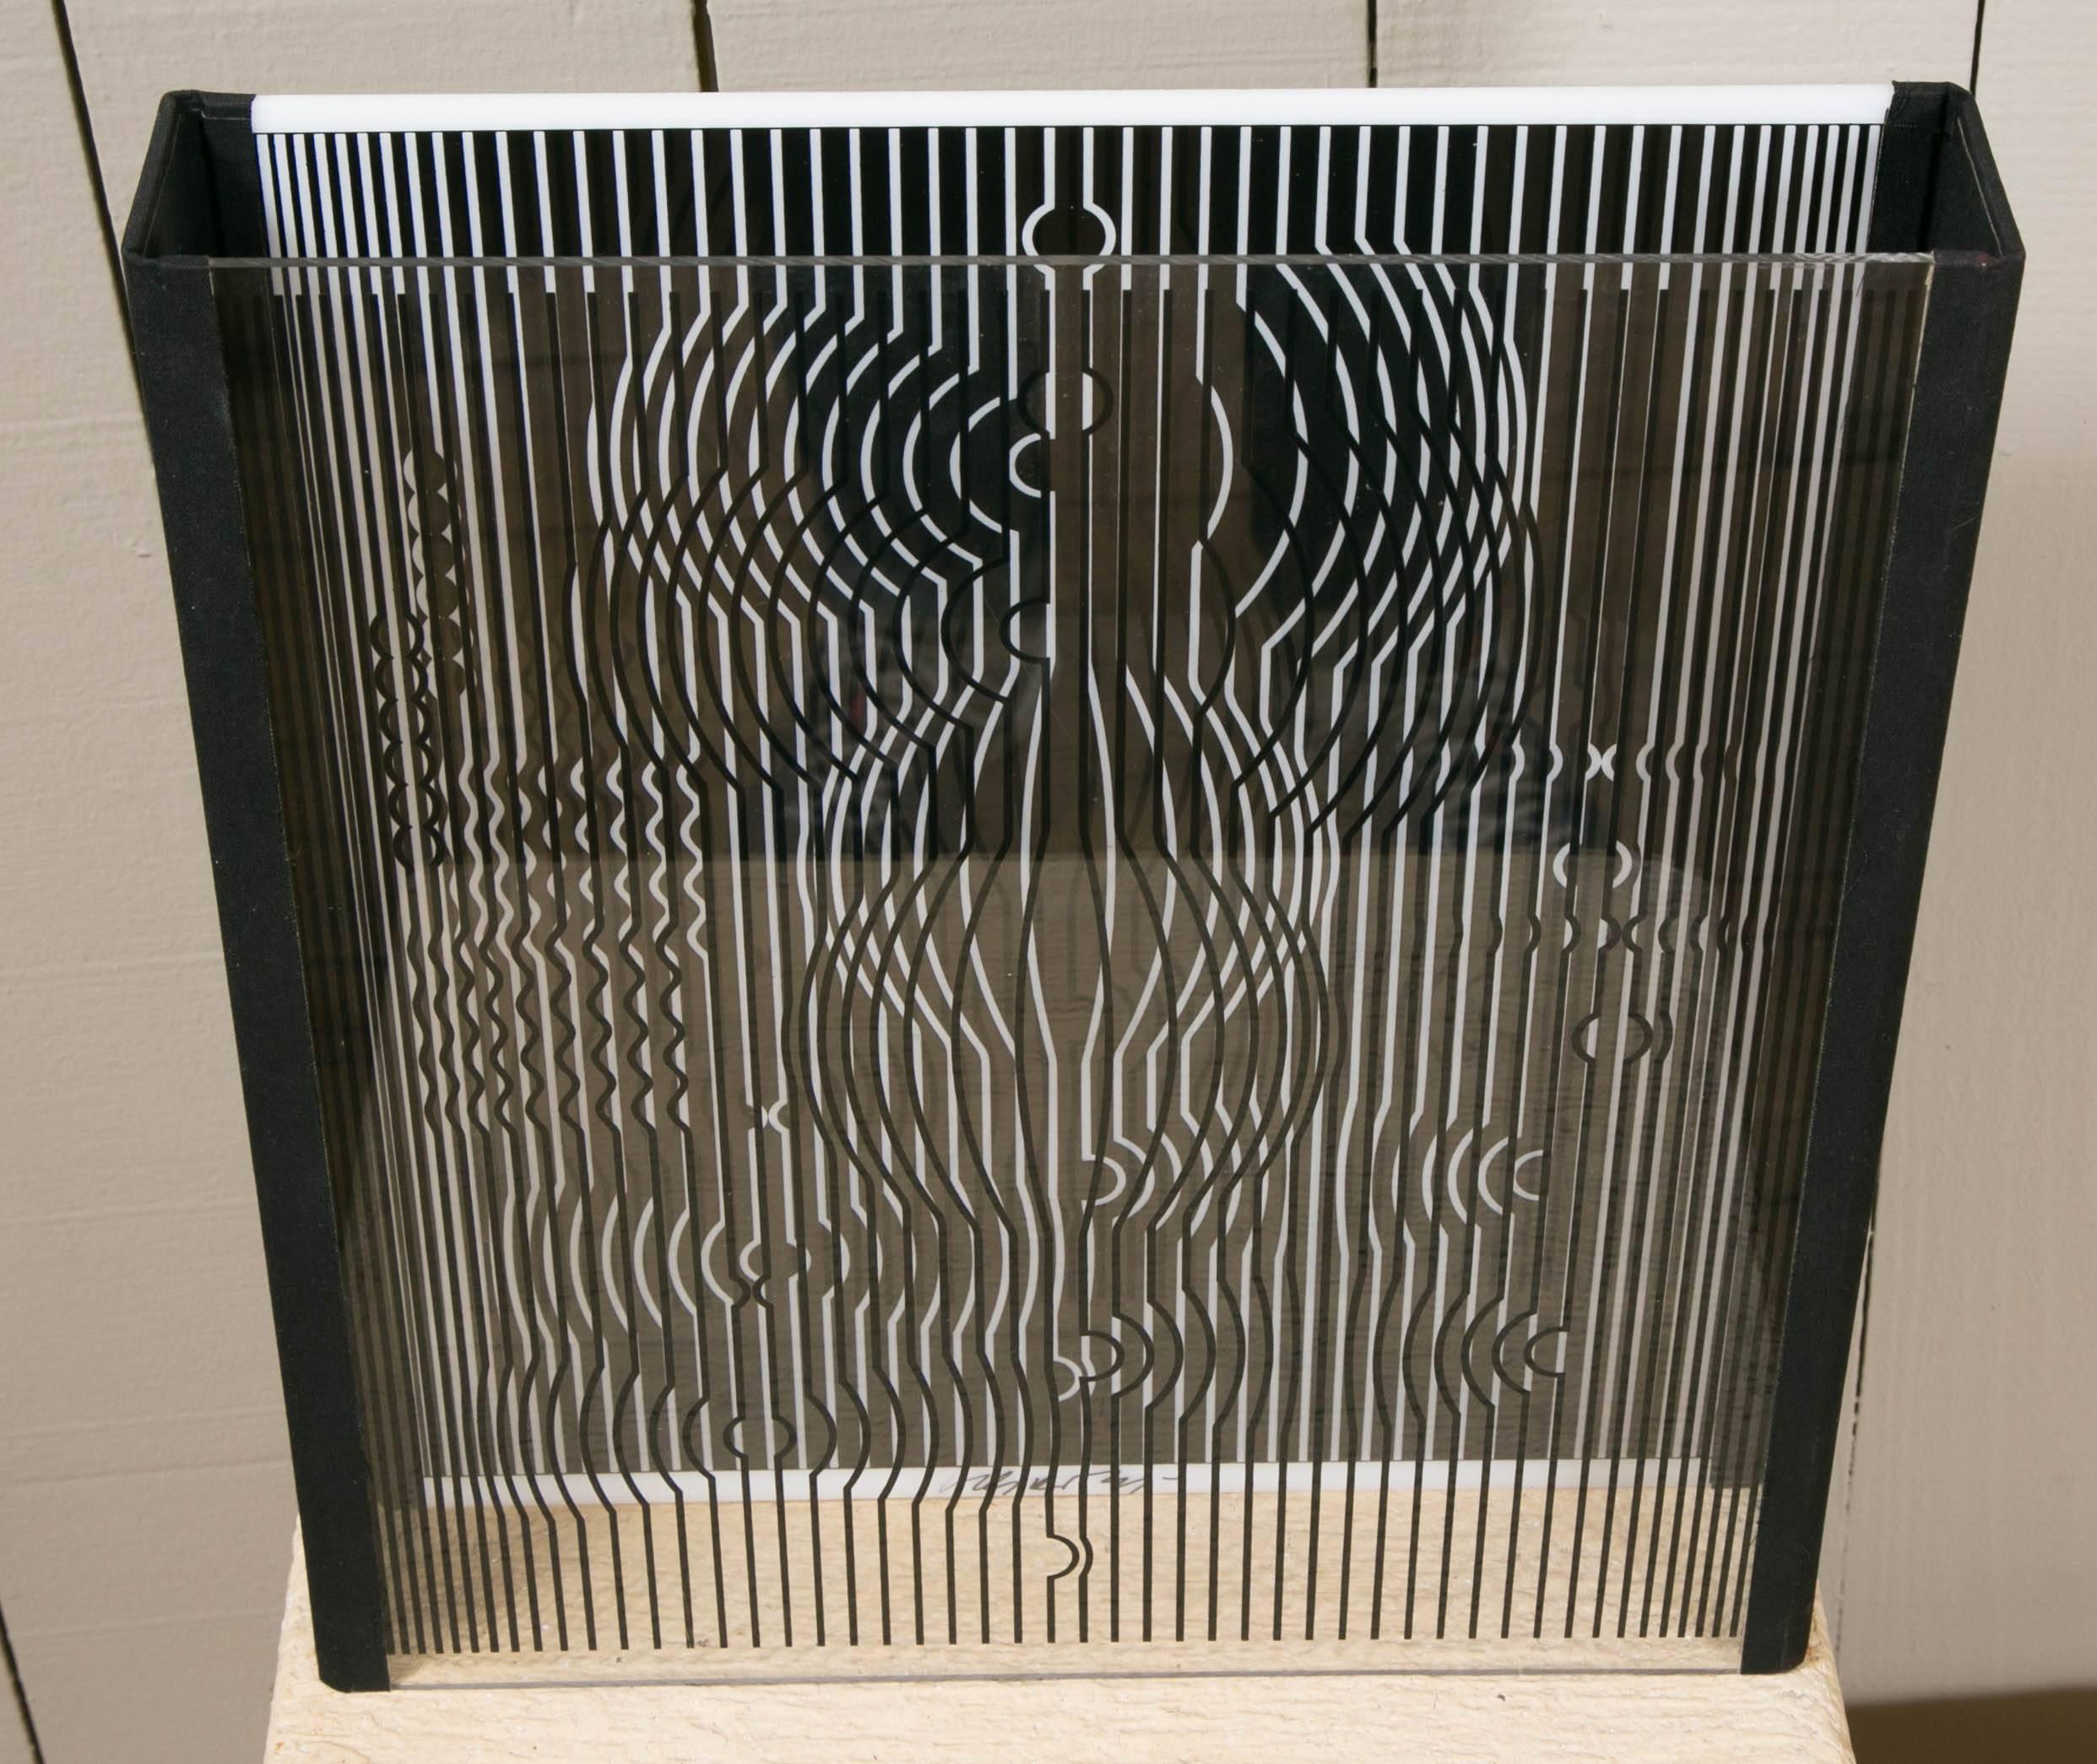 Optical sculpture from the artist Vasarely.
Composed of two plexiglass panel with engraved with lines and convex circles that changes depending on the viewing angle.
Signed by the artist in black ink and numbered on the back.